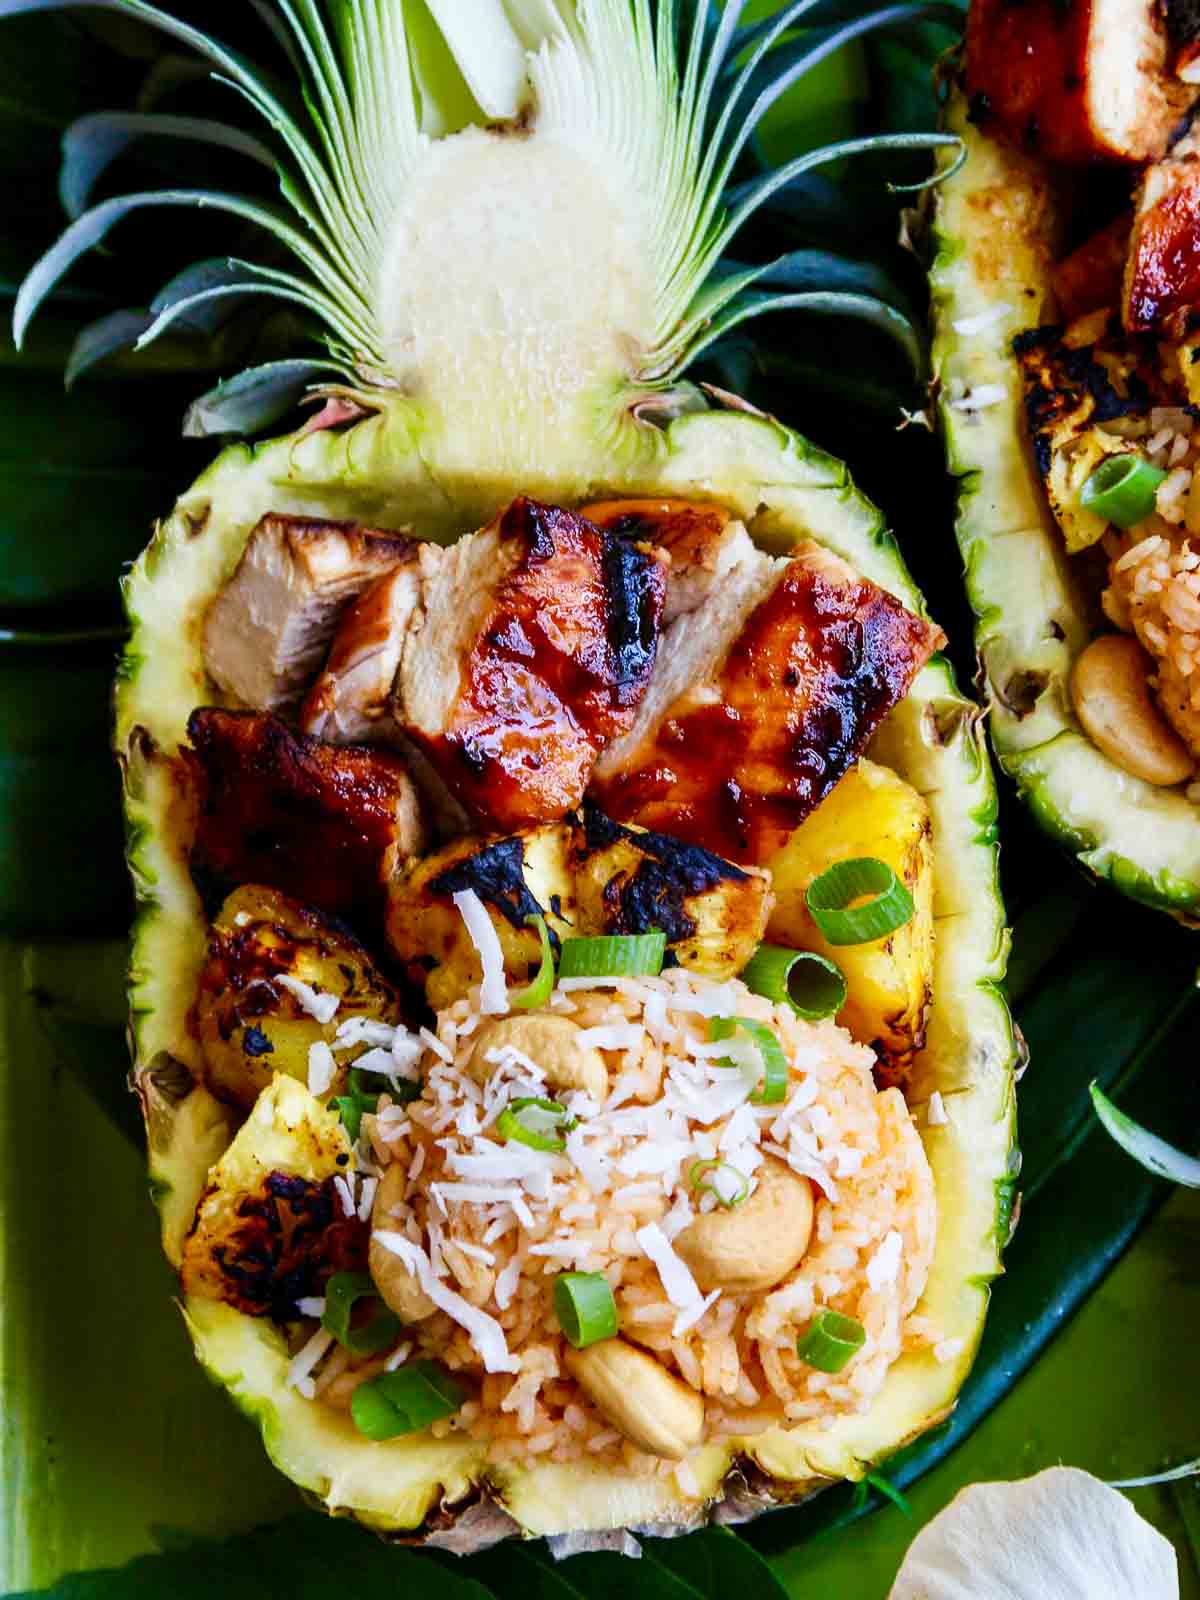 Huli huli chicken with coconut rice served in a pineapple.